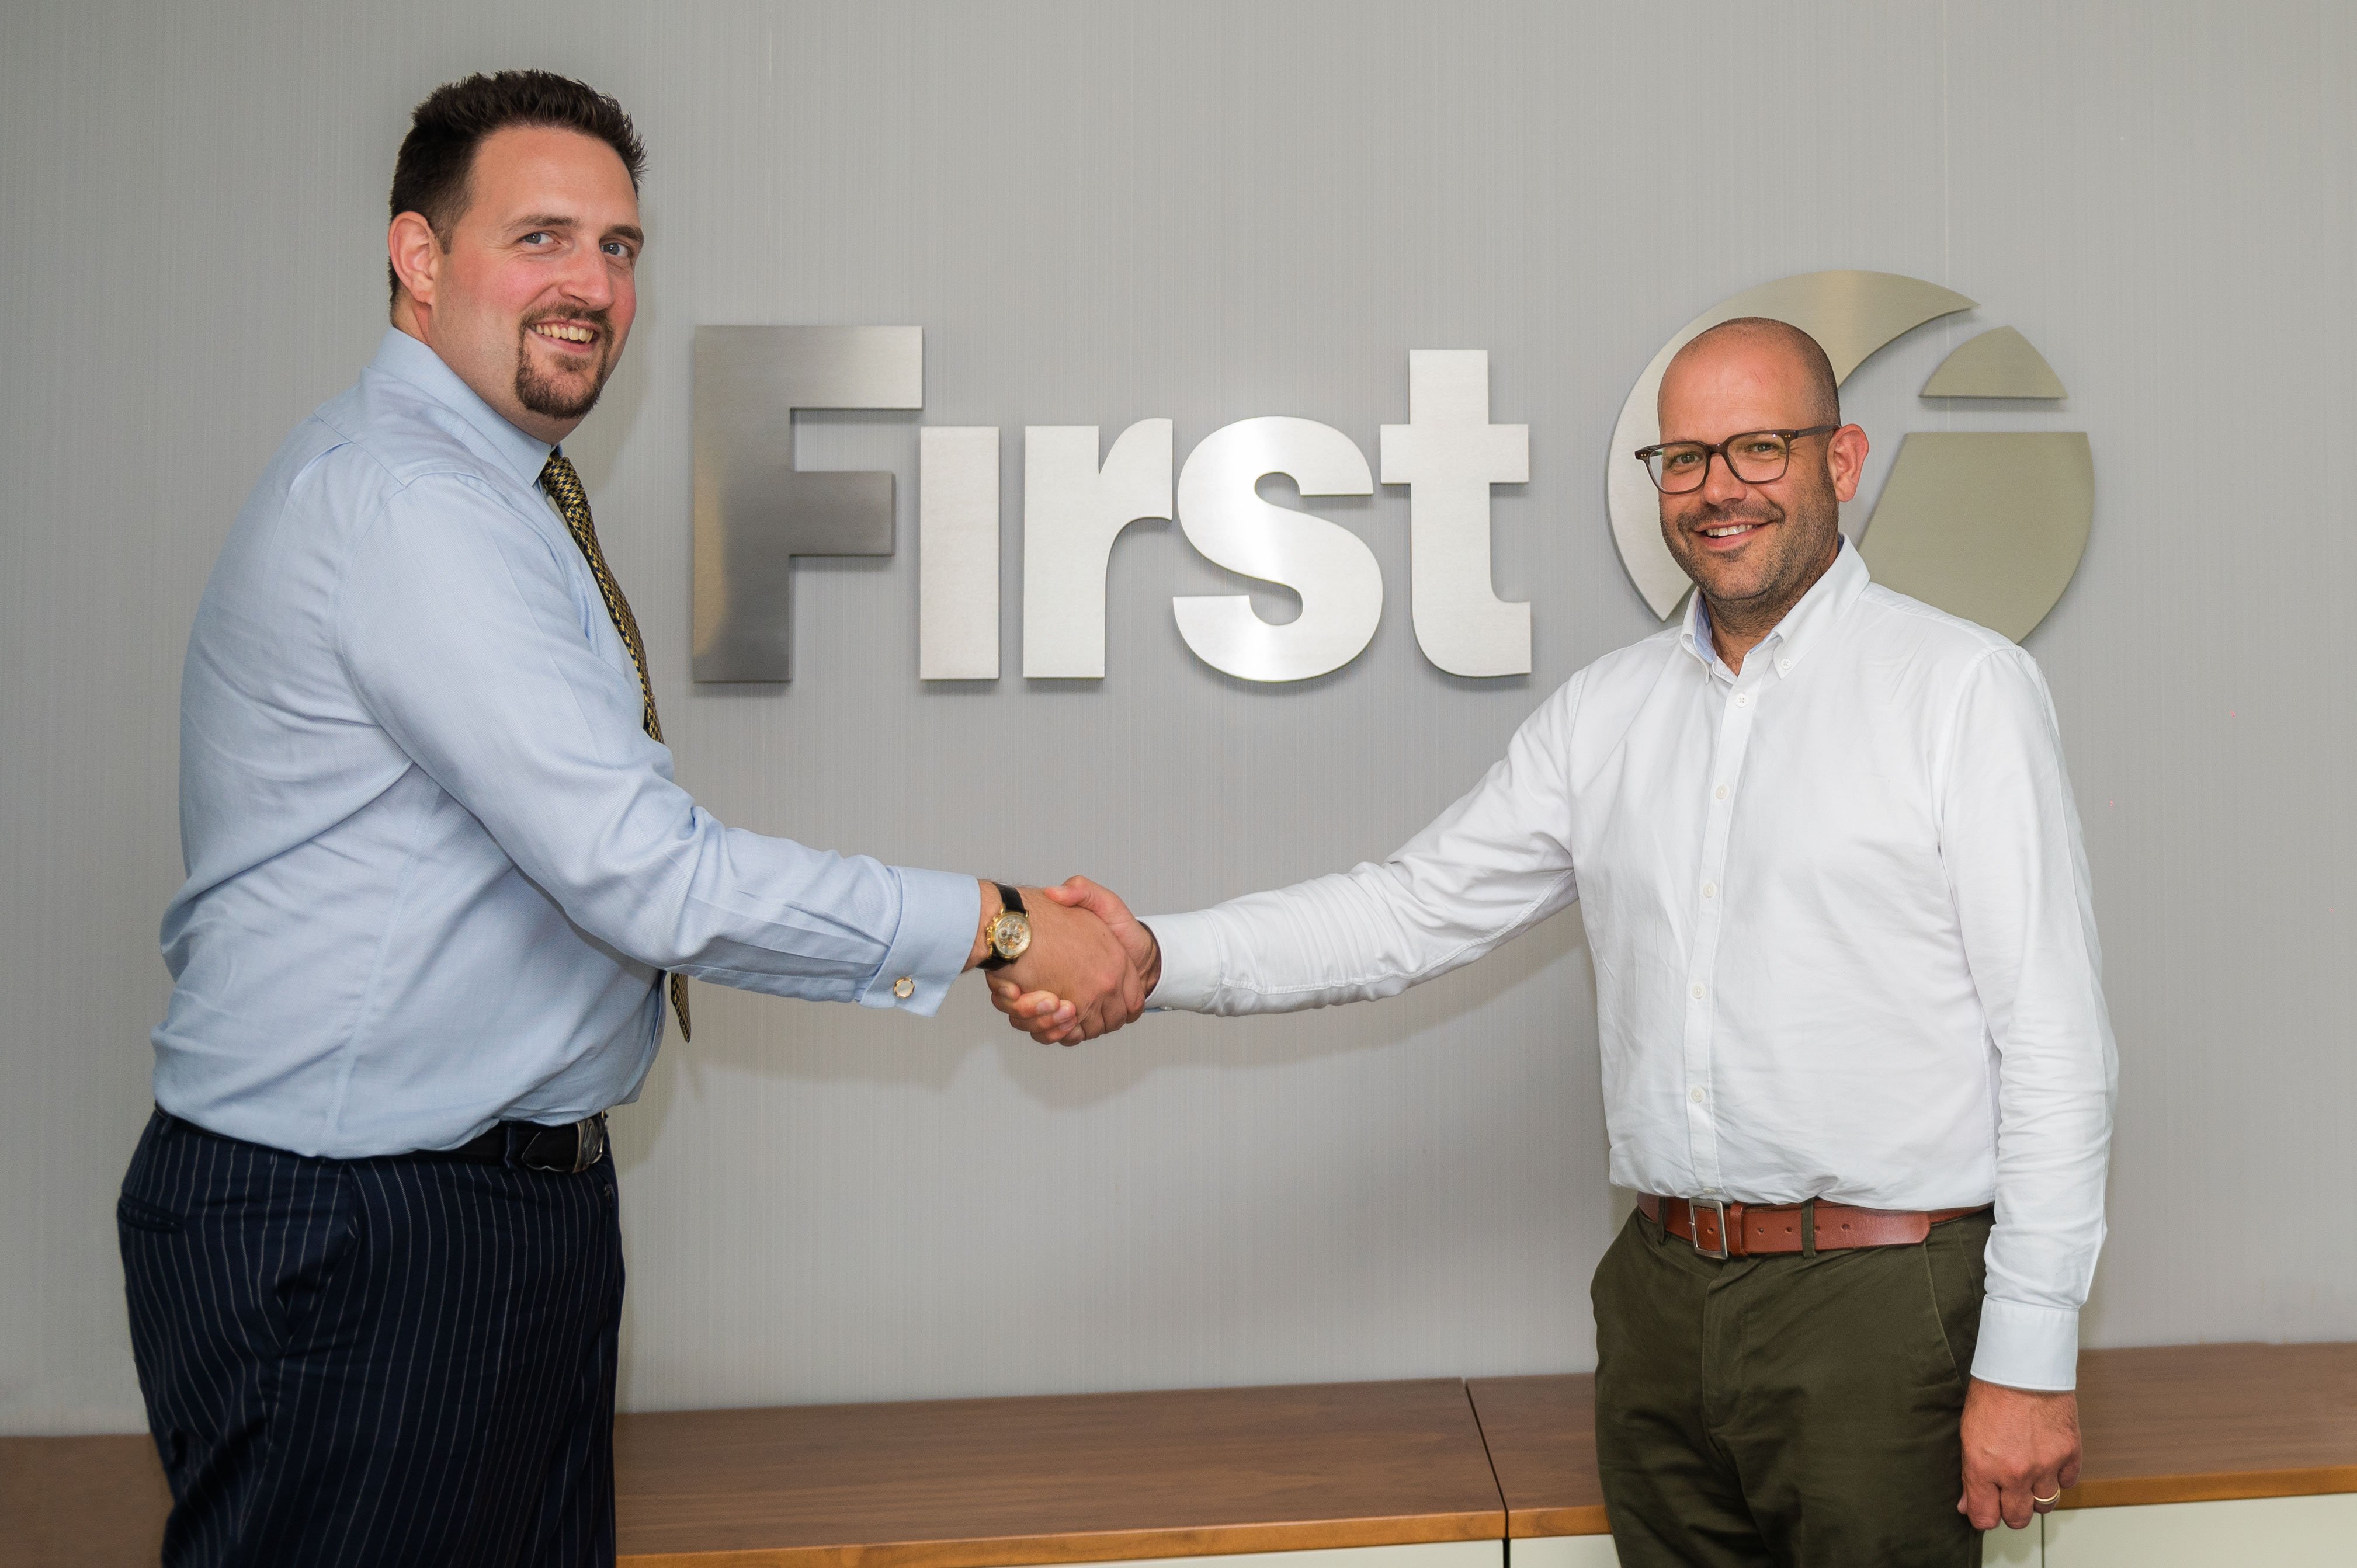 Optibus General Manager, EMEA, Dave Joshua (left) and First Bus Chief Commercial Officer, Simon Pearson (right) at the First Bus offices.